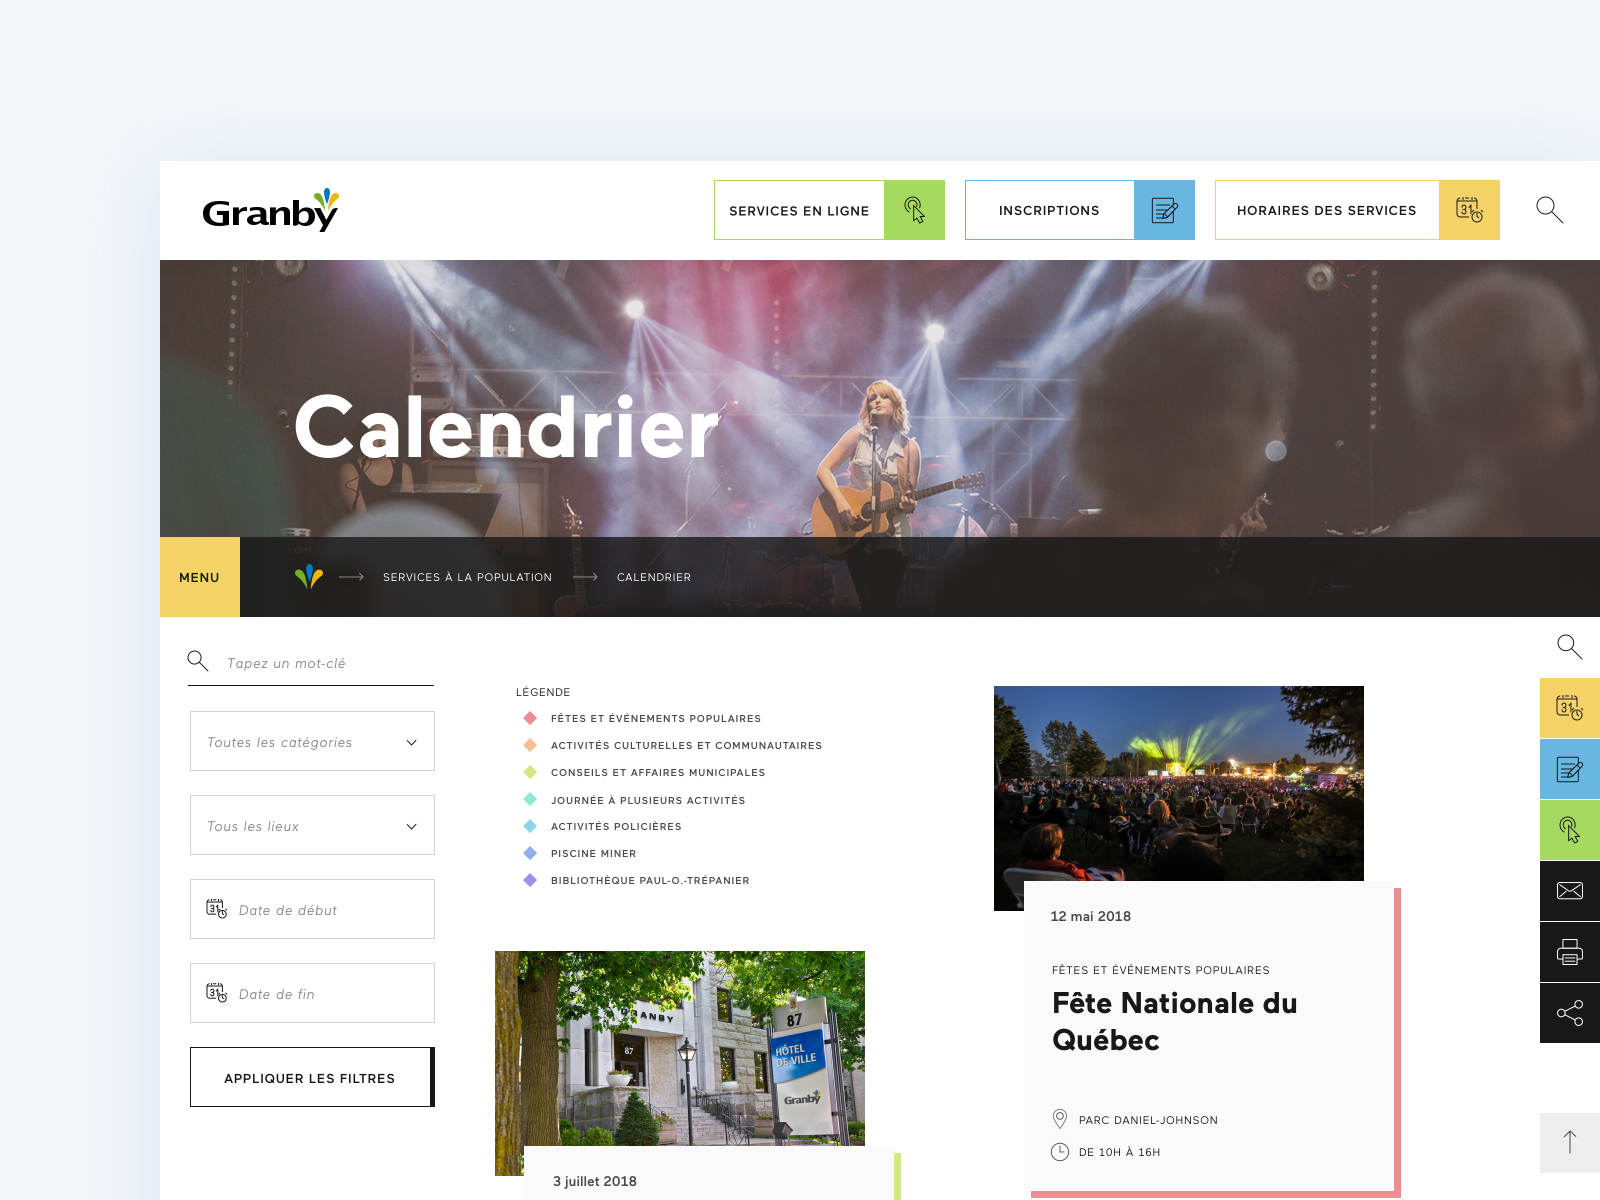 City of Granby Events calendar by Laura Lee Moreau on Dribbble